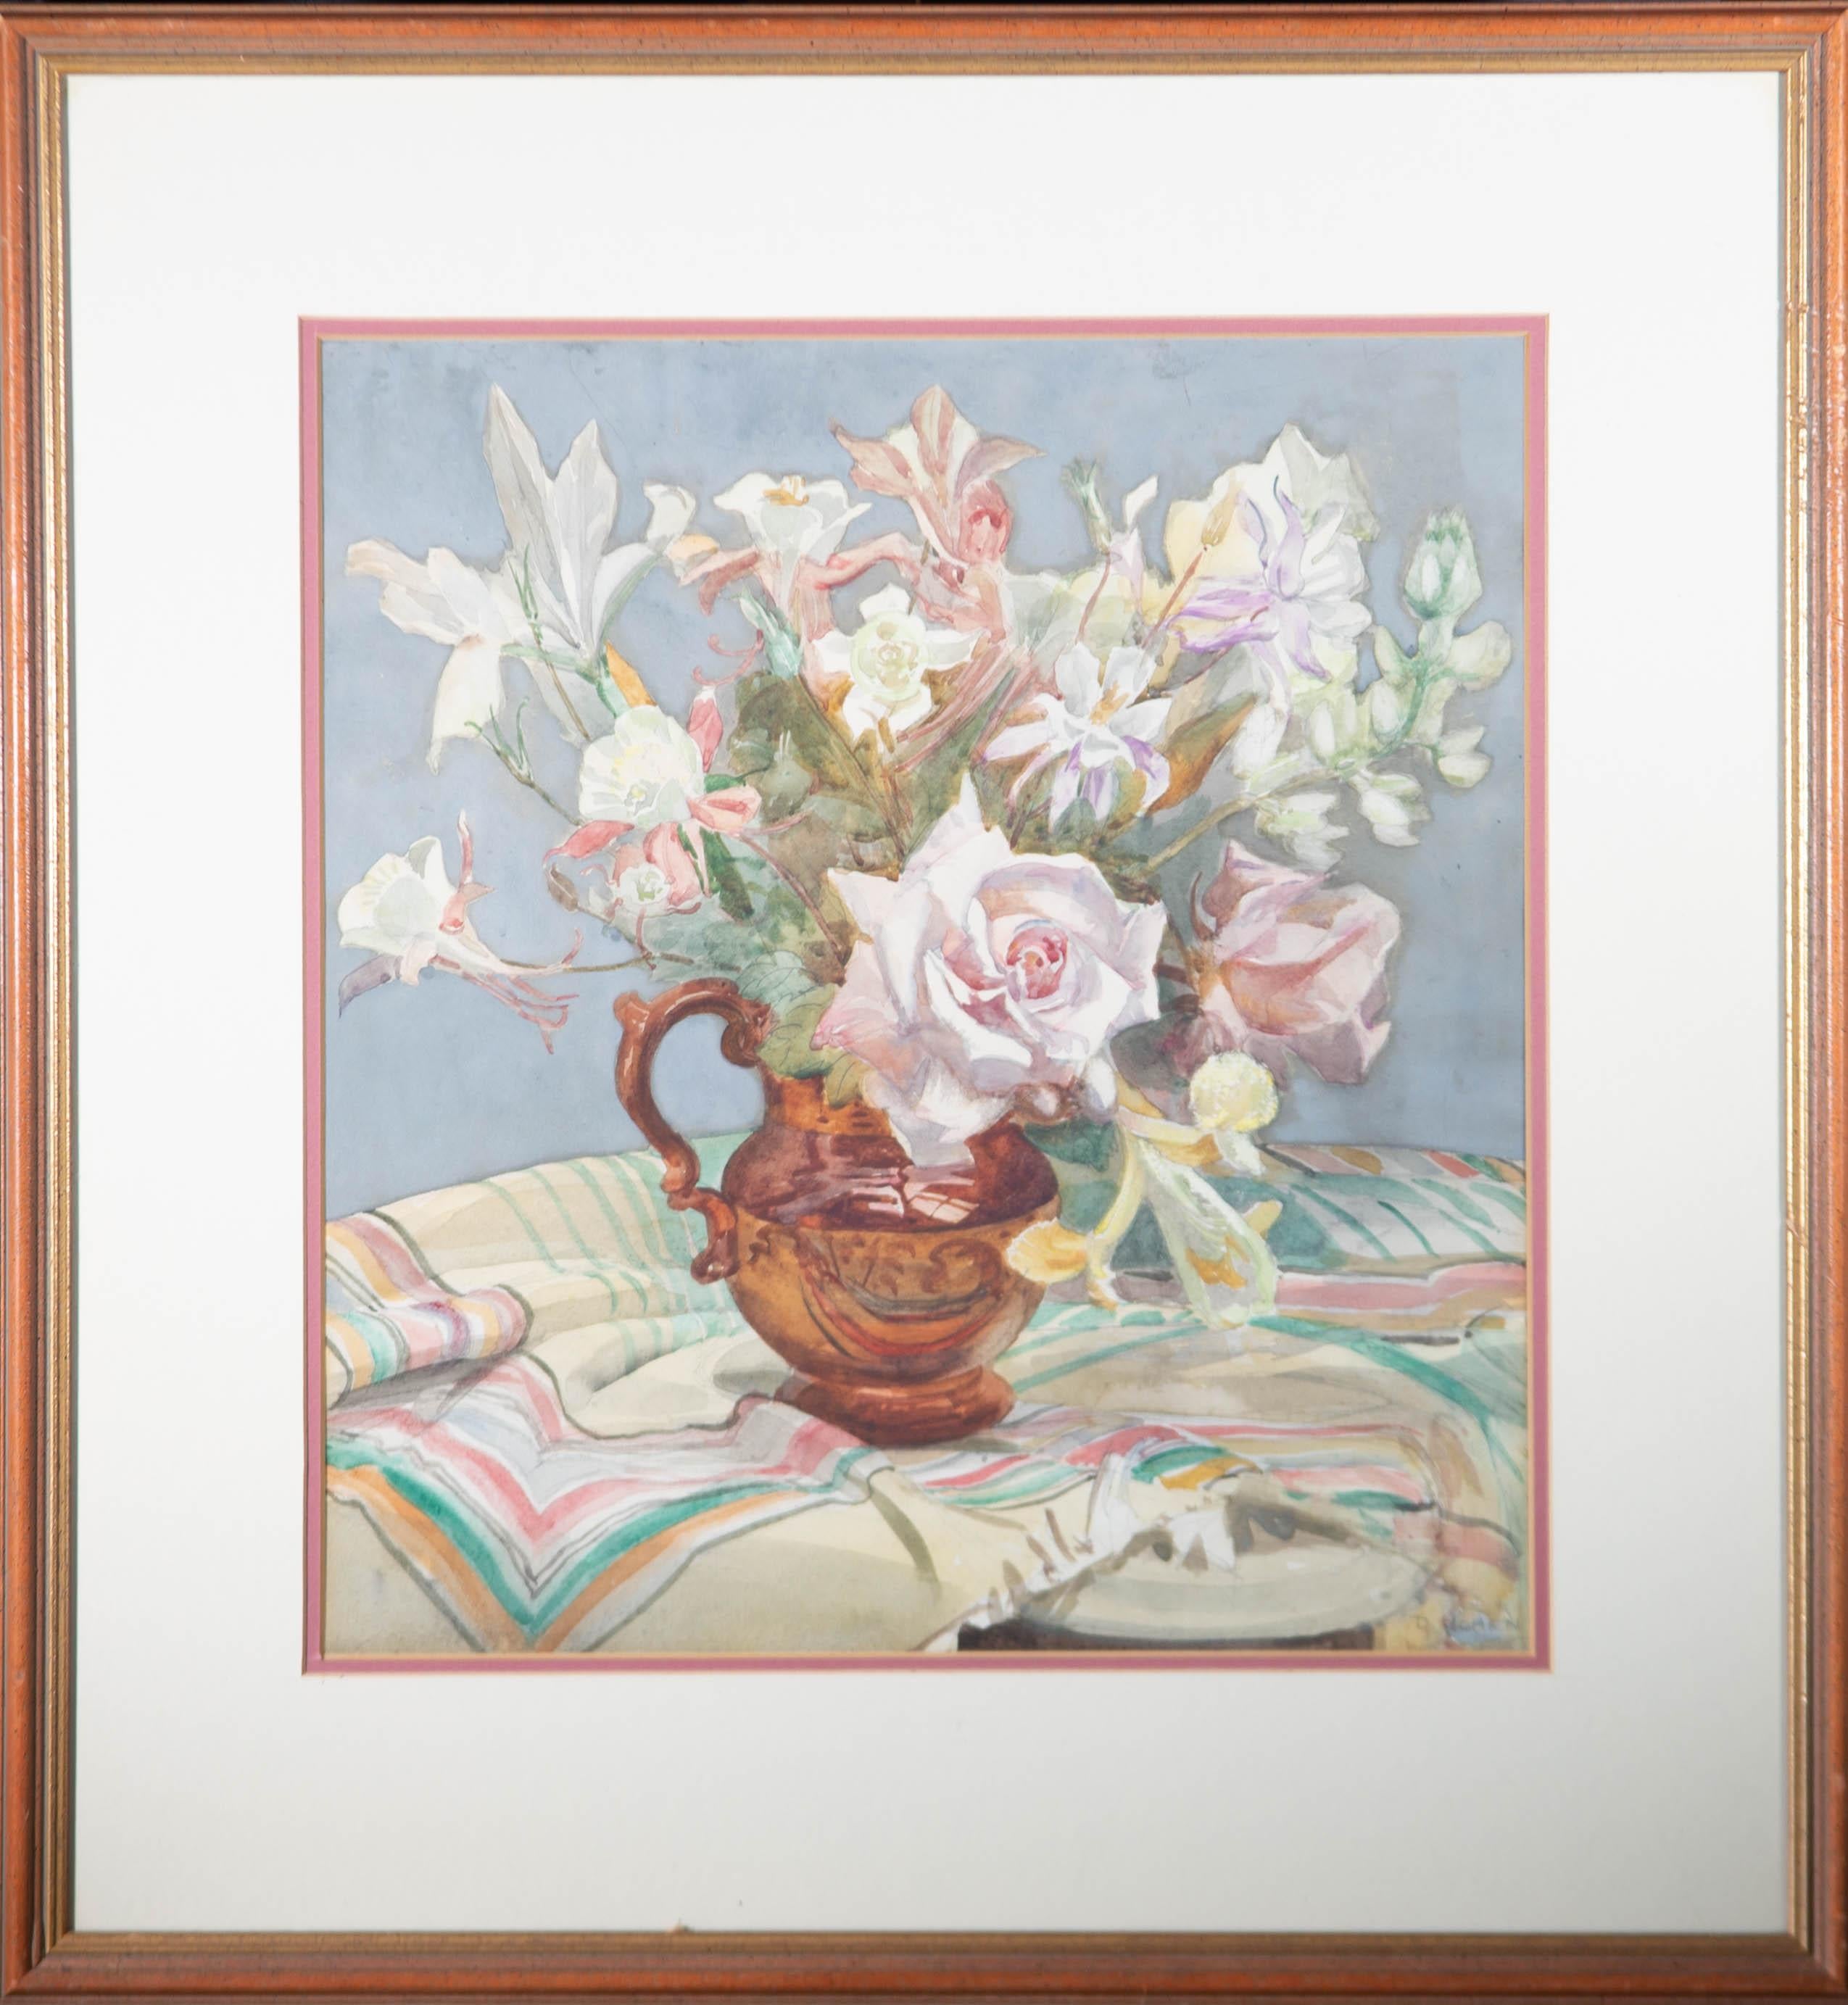 Unknown Still-Life - A. Dorothy Cohen (1887-1960) - Mid 20th Century Watercolour, Flower Vase